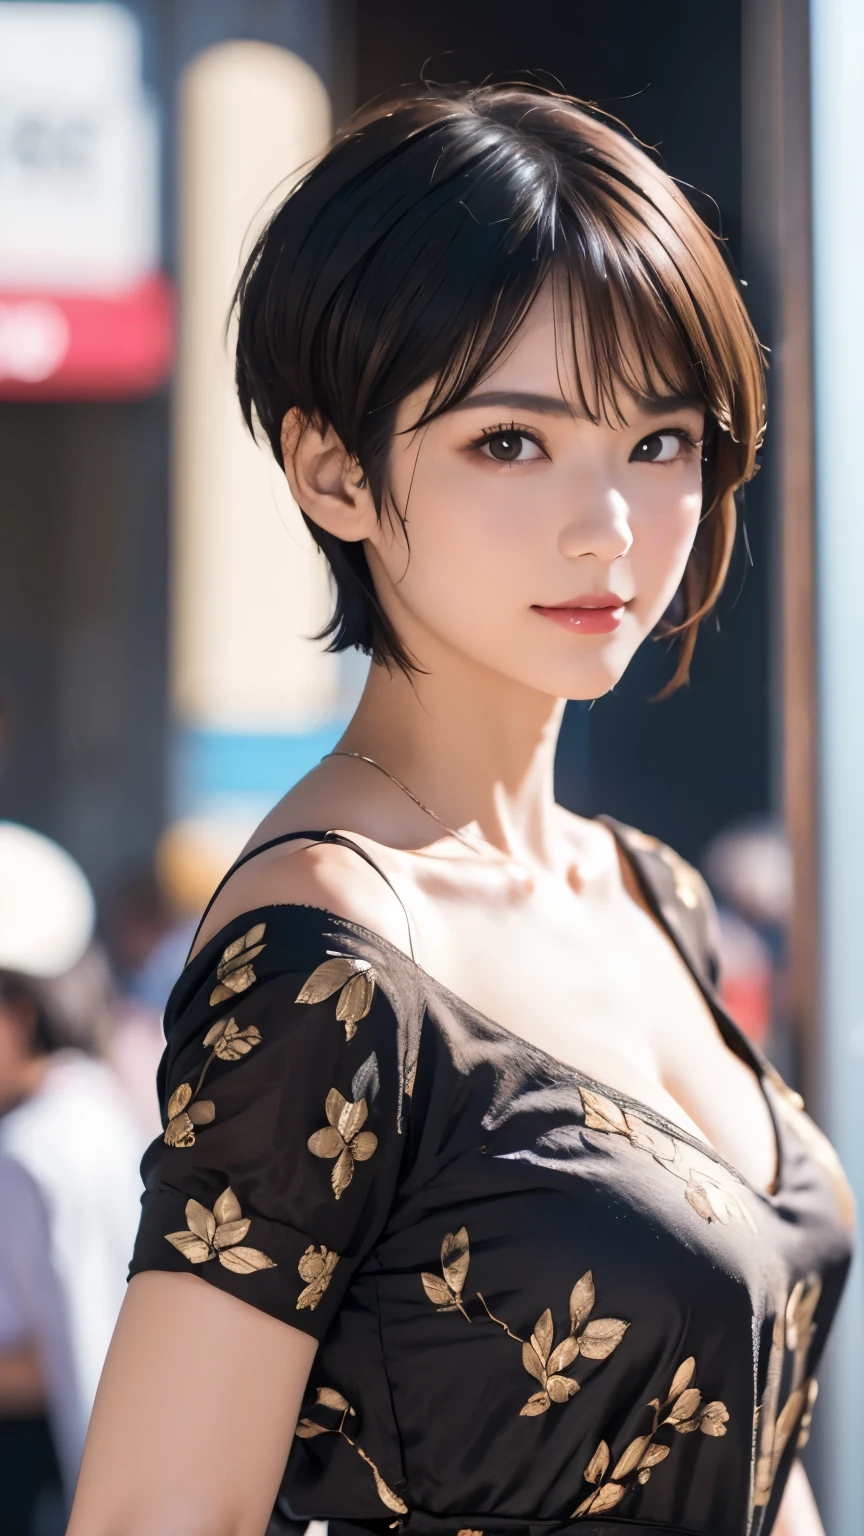 144
(20 year old woman,Are standing), (surreal), (High resolution), ((beautiful hairstyle 46)), ((short hair:1.46)), (gentle smile), (breasted:1.1), (lipstick)
